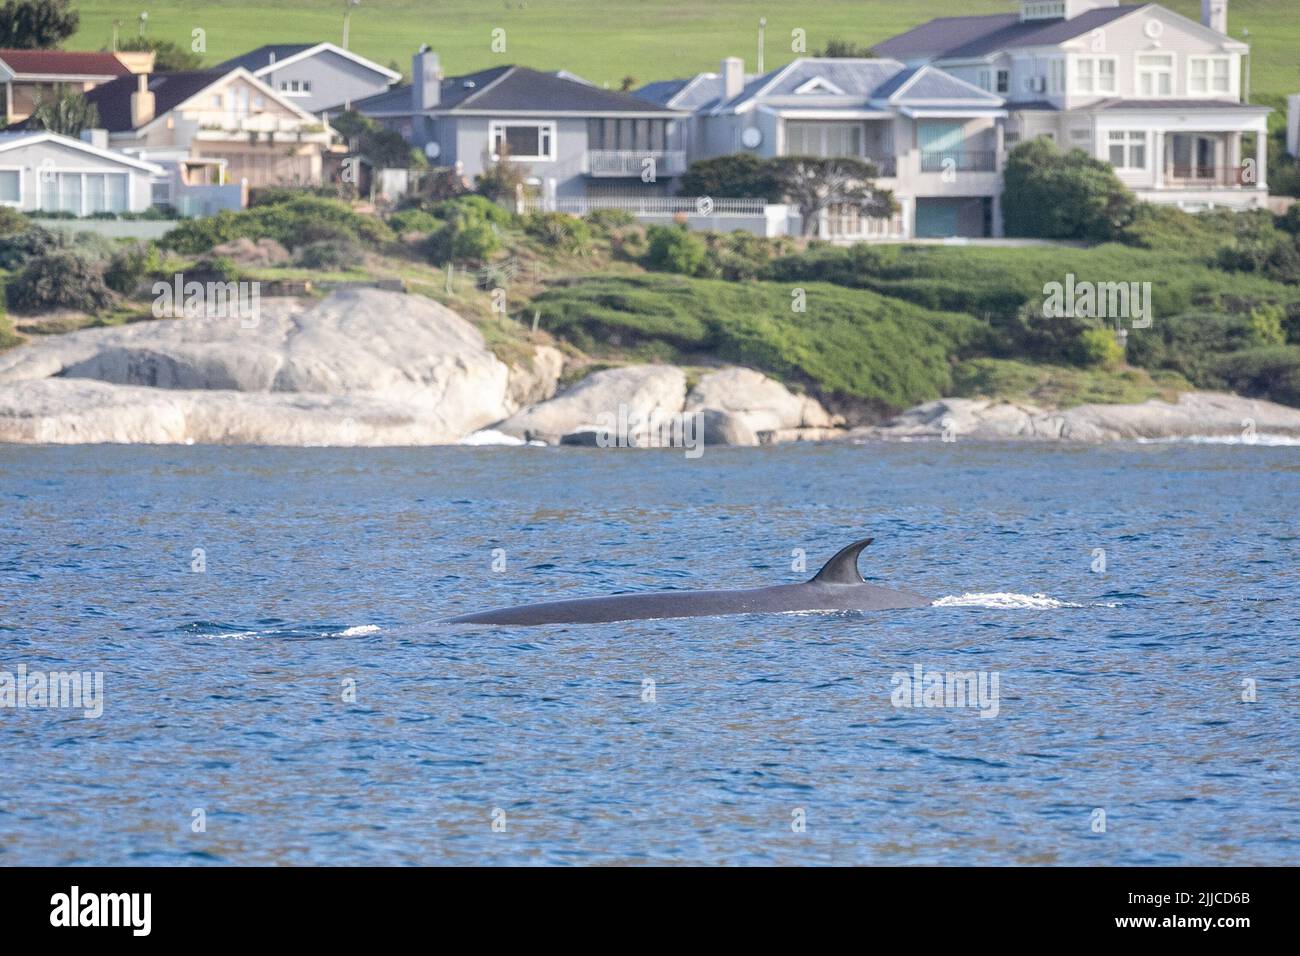 (220725) -- CAPE TOWN, July 25, 2022 (Xinhua) -- A Bryde's whale is seen in Cape Town, South Africa, on June 15, 2022.  TO GO WITH 'Feature: Passion for whales takes Cape Town residents to citizen science' (Xinhua/Lyu Tianran) Stock Photo